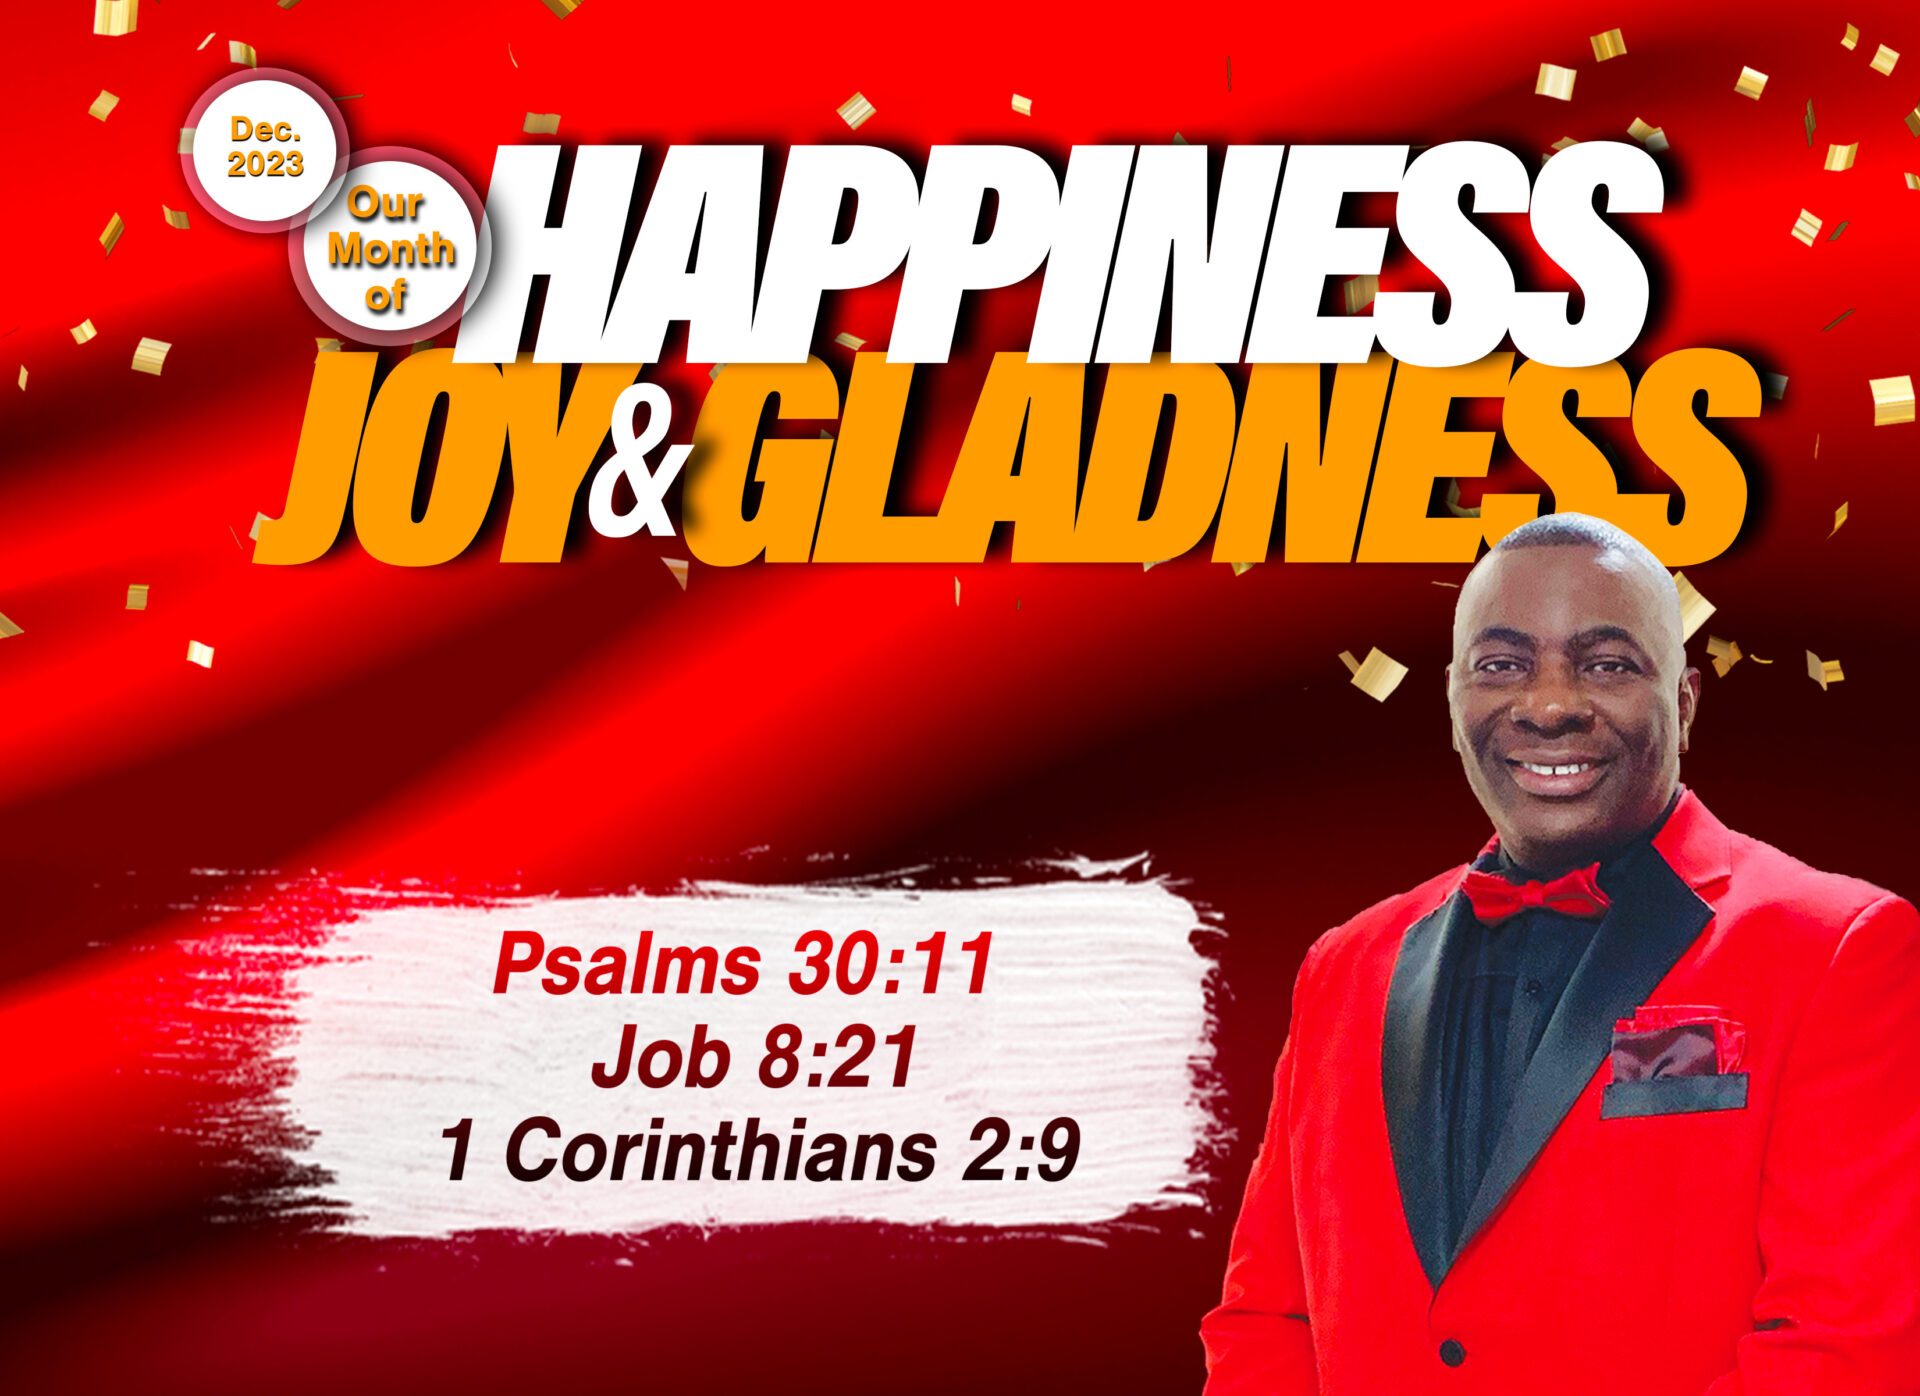 You are currently viewing Our Month of HAPPINESS, JOY, AND GLADNESS